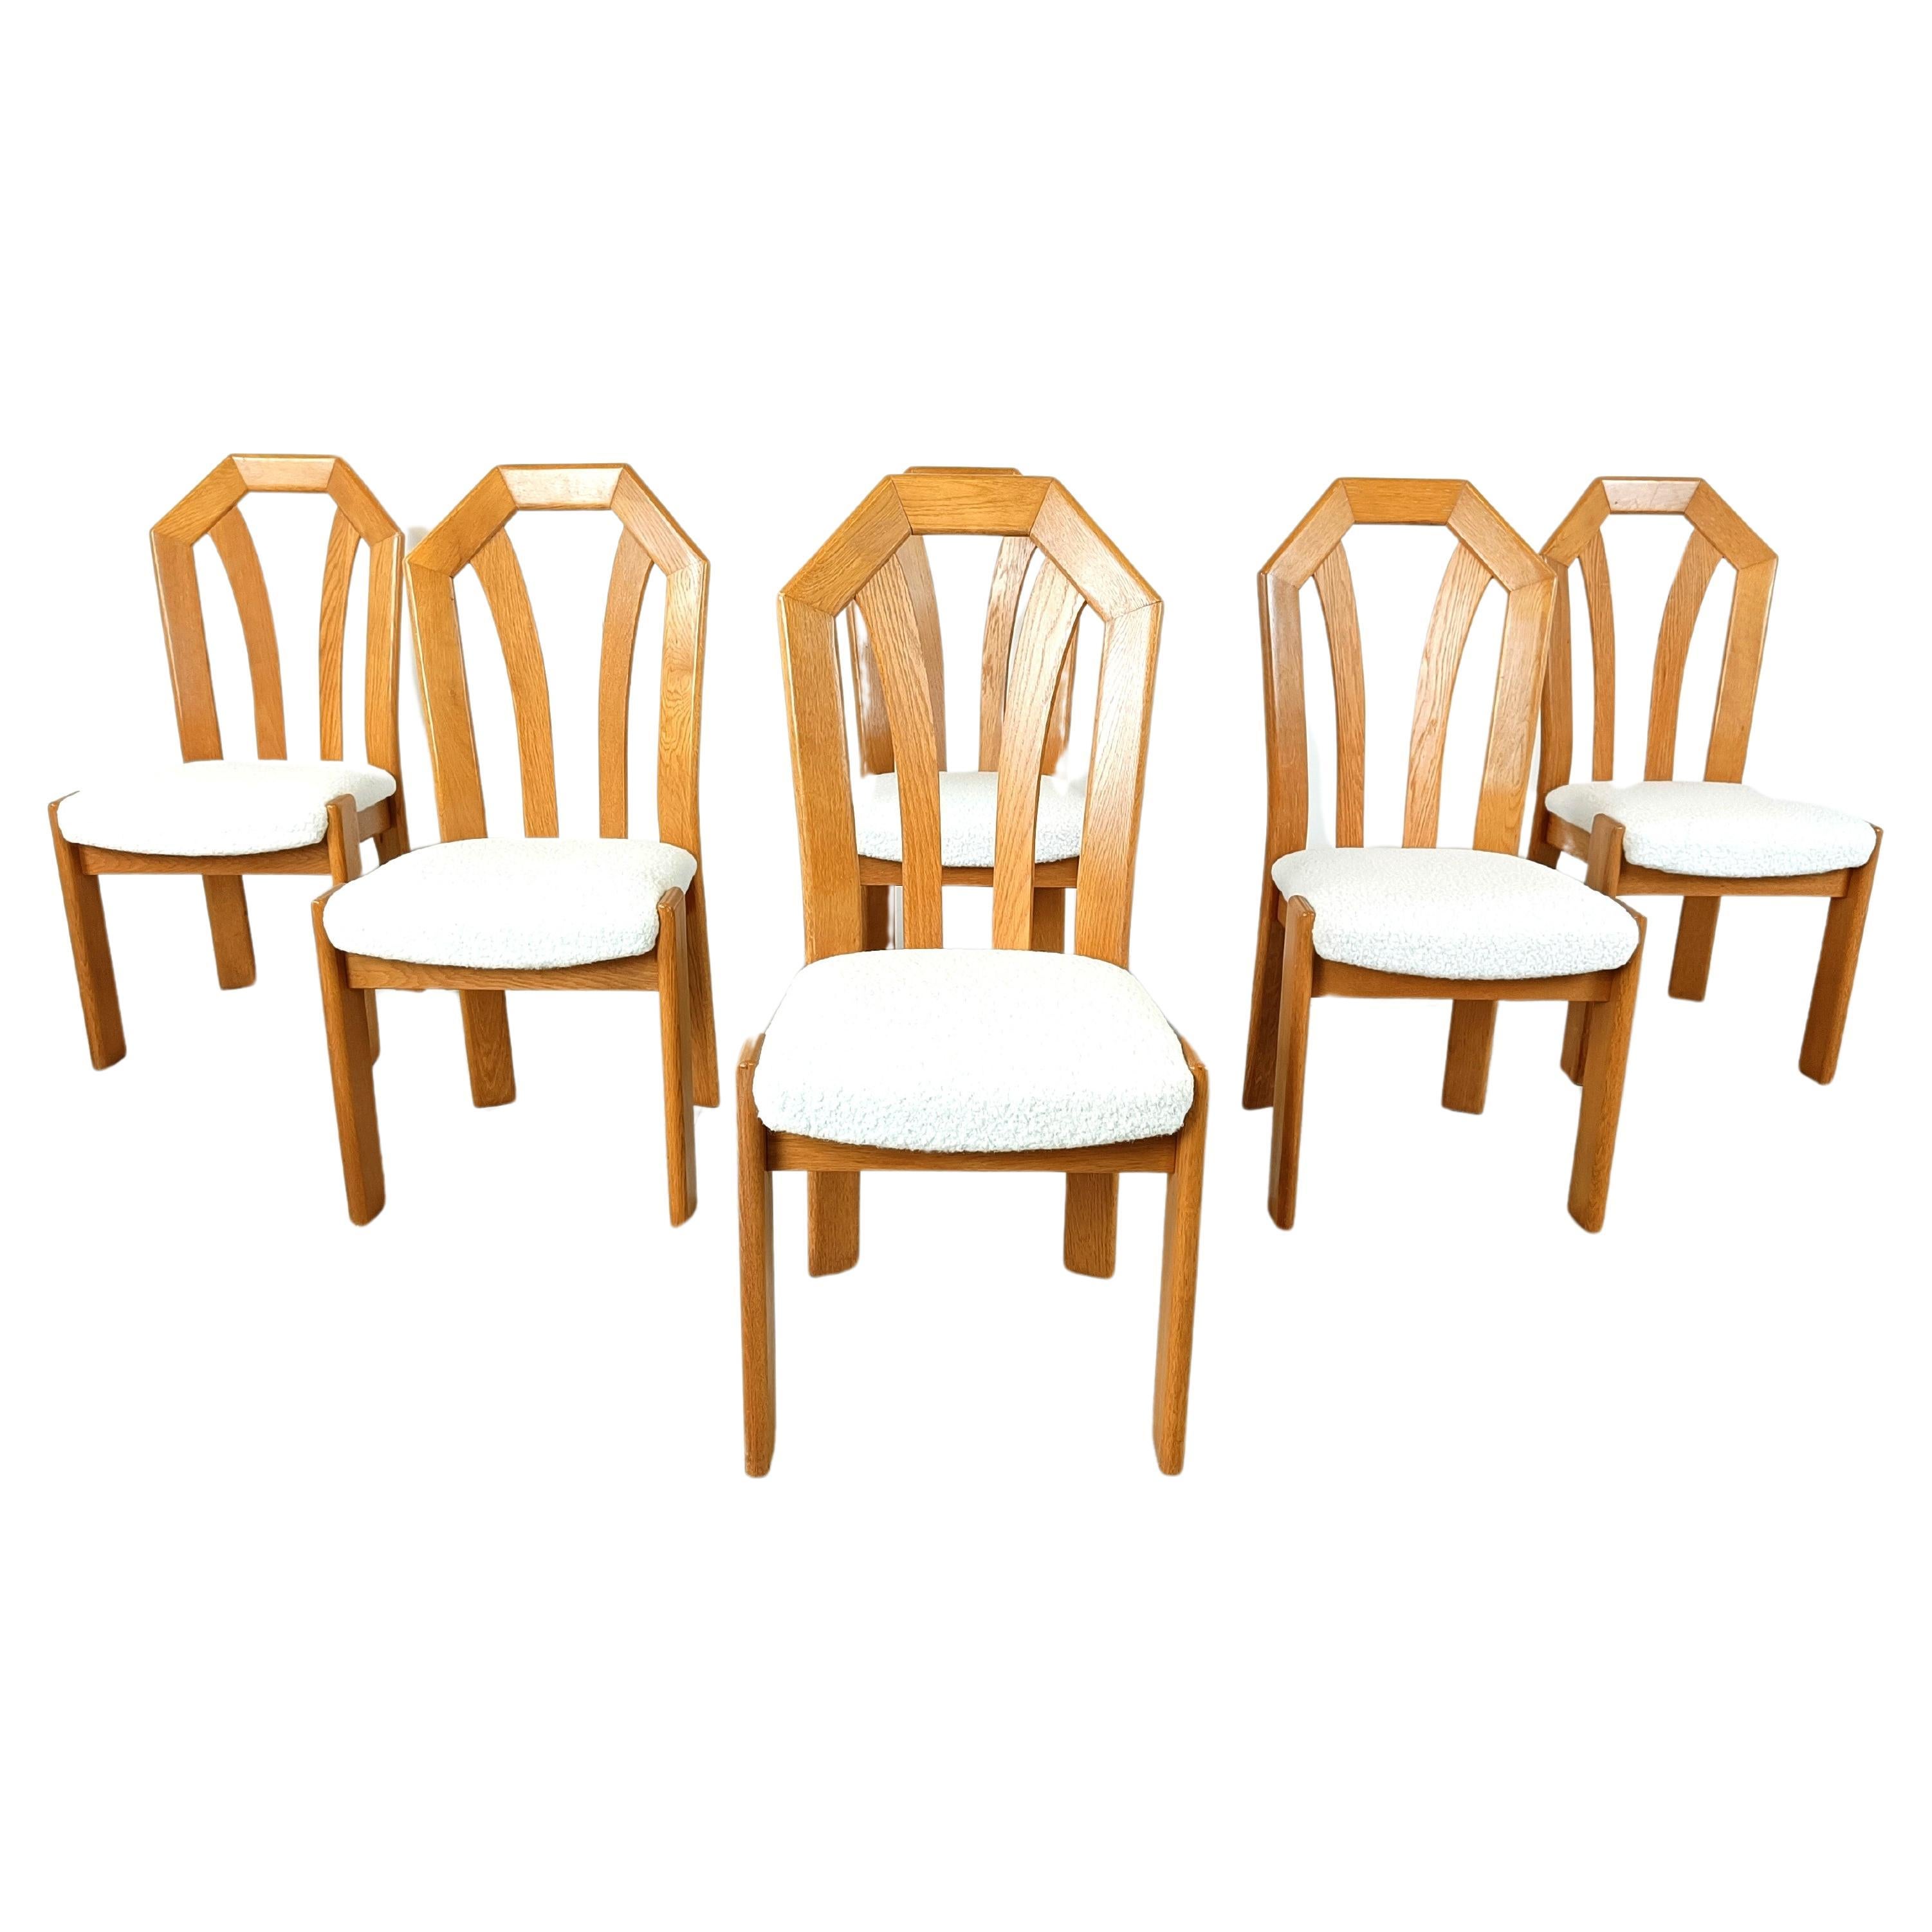 Set of 6 brutalist oak dining chairs, 1970s For Sale